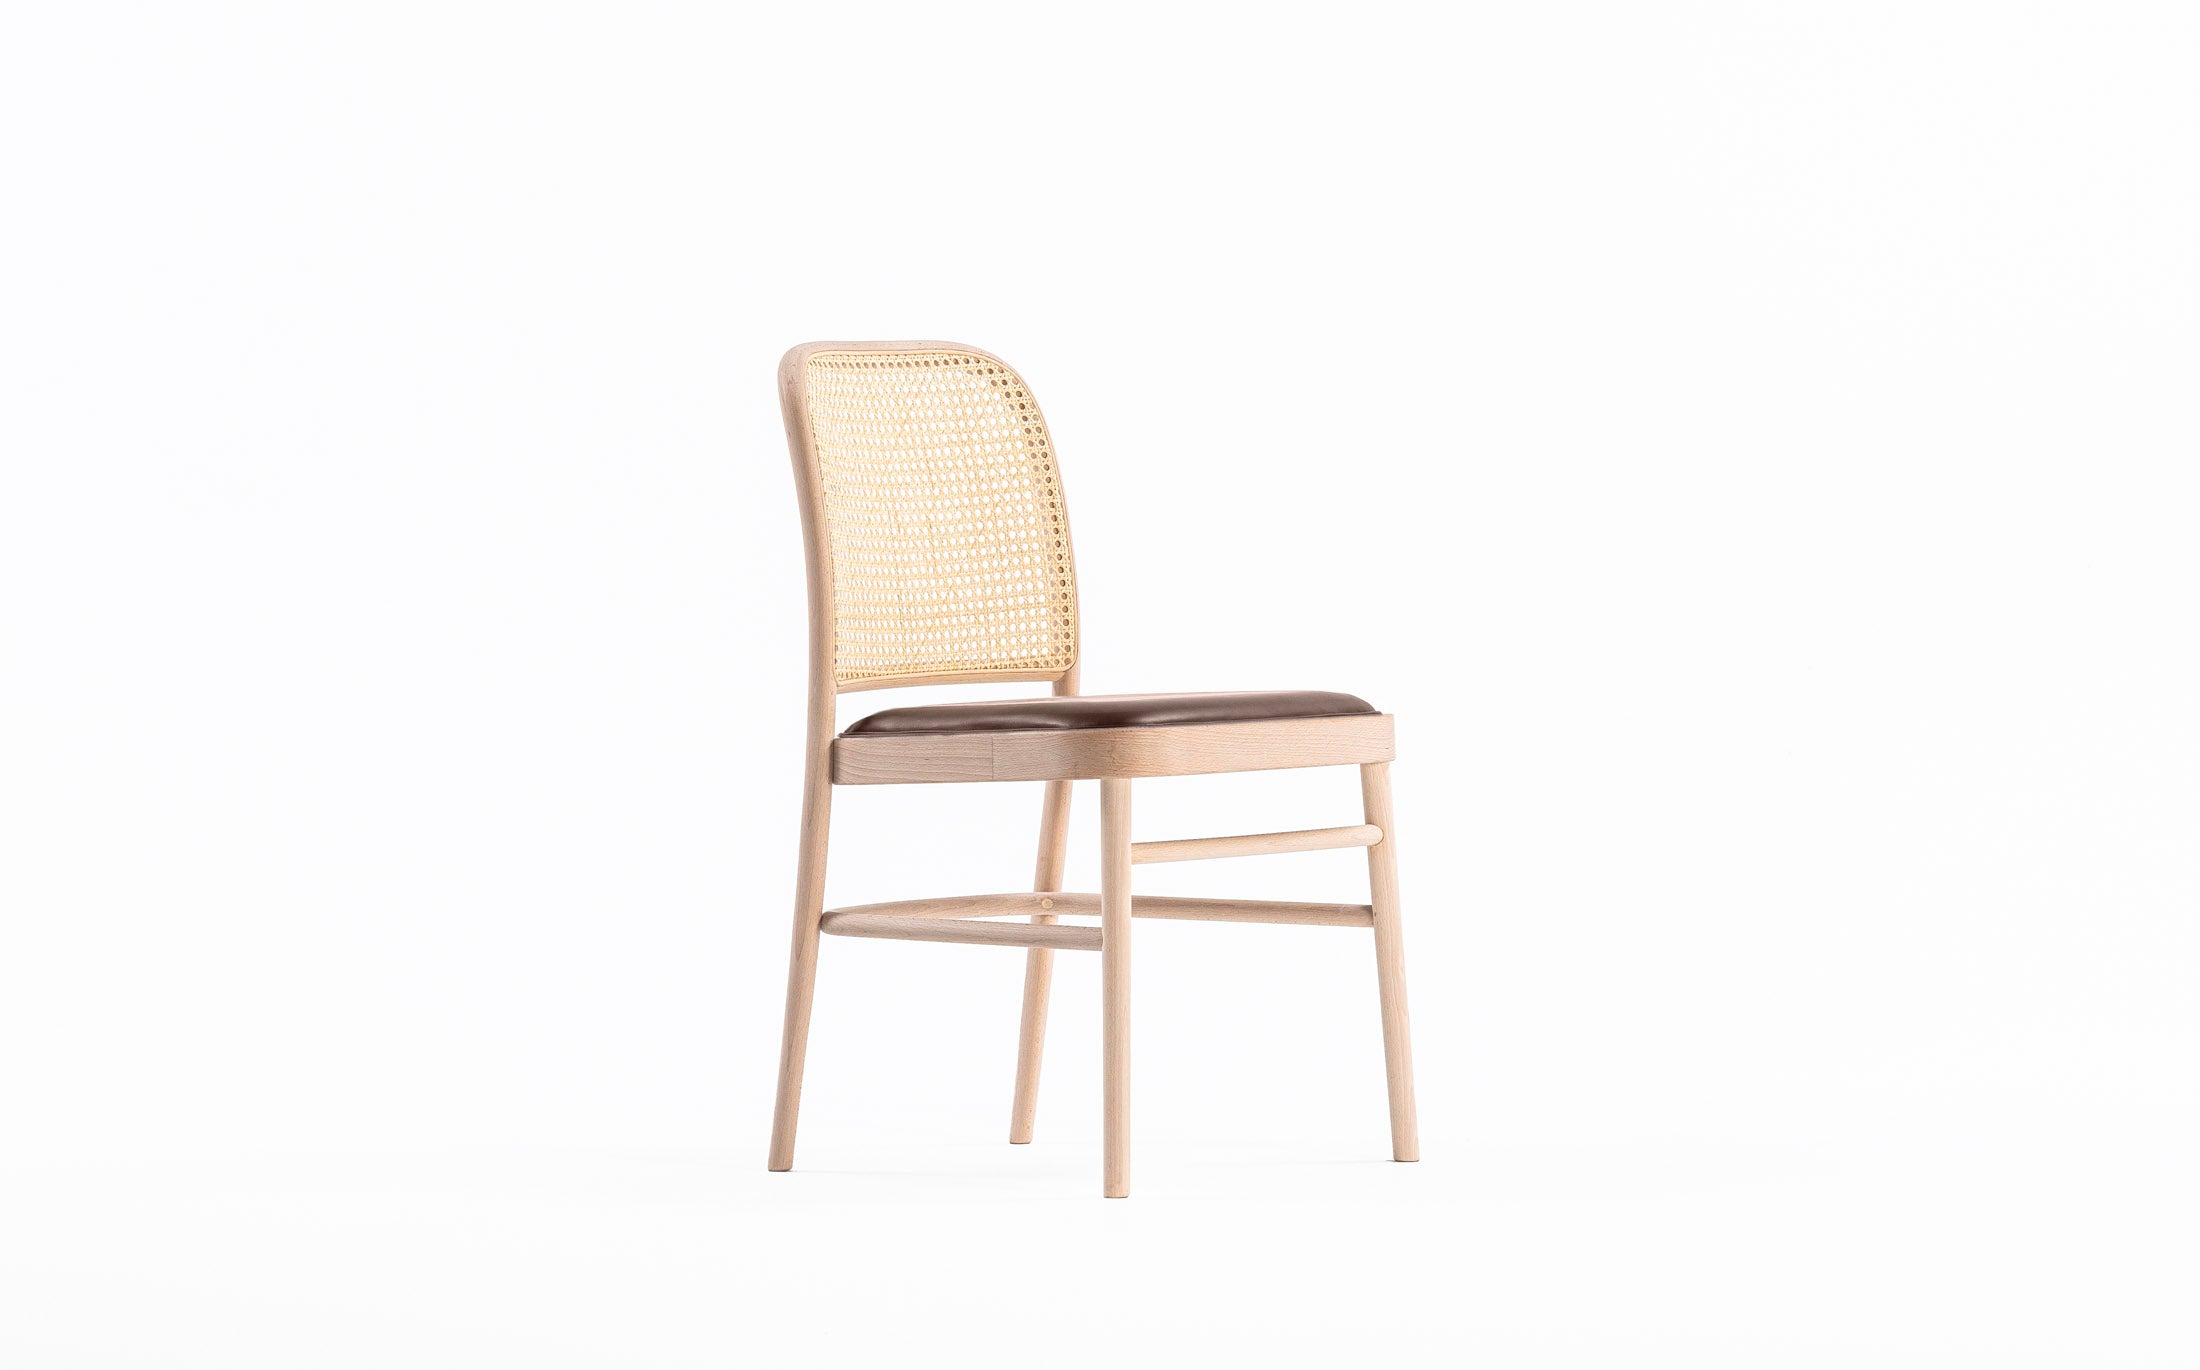 The bent chair #Seat materials_smooth leather 40103